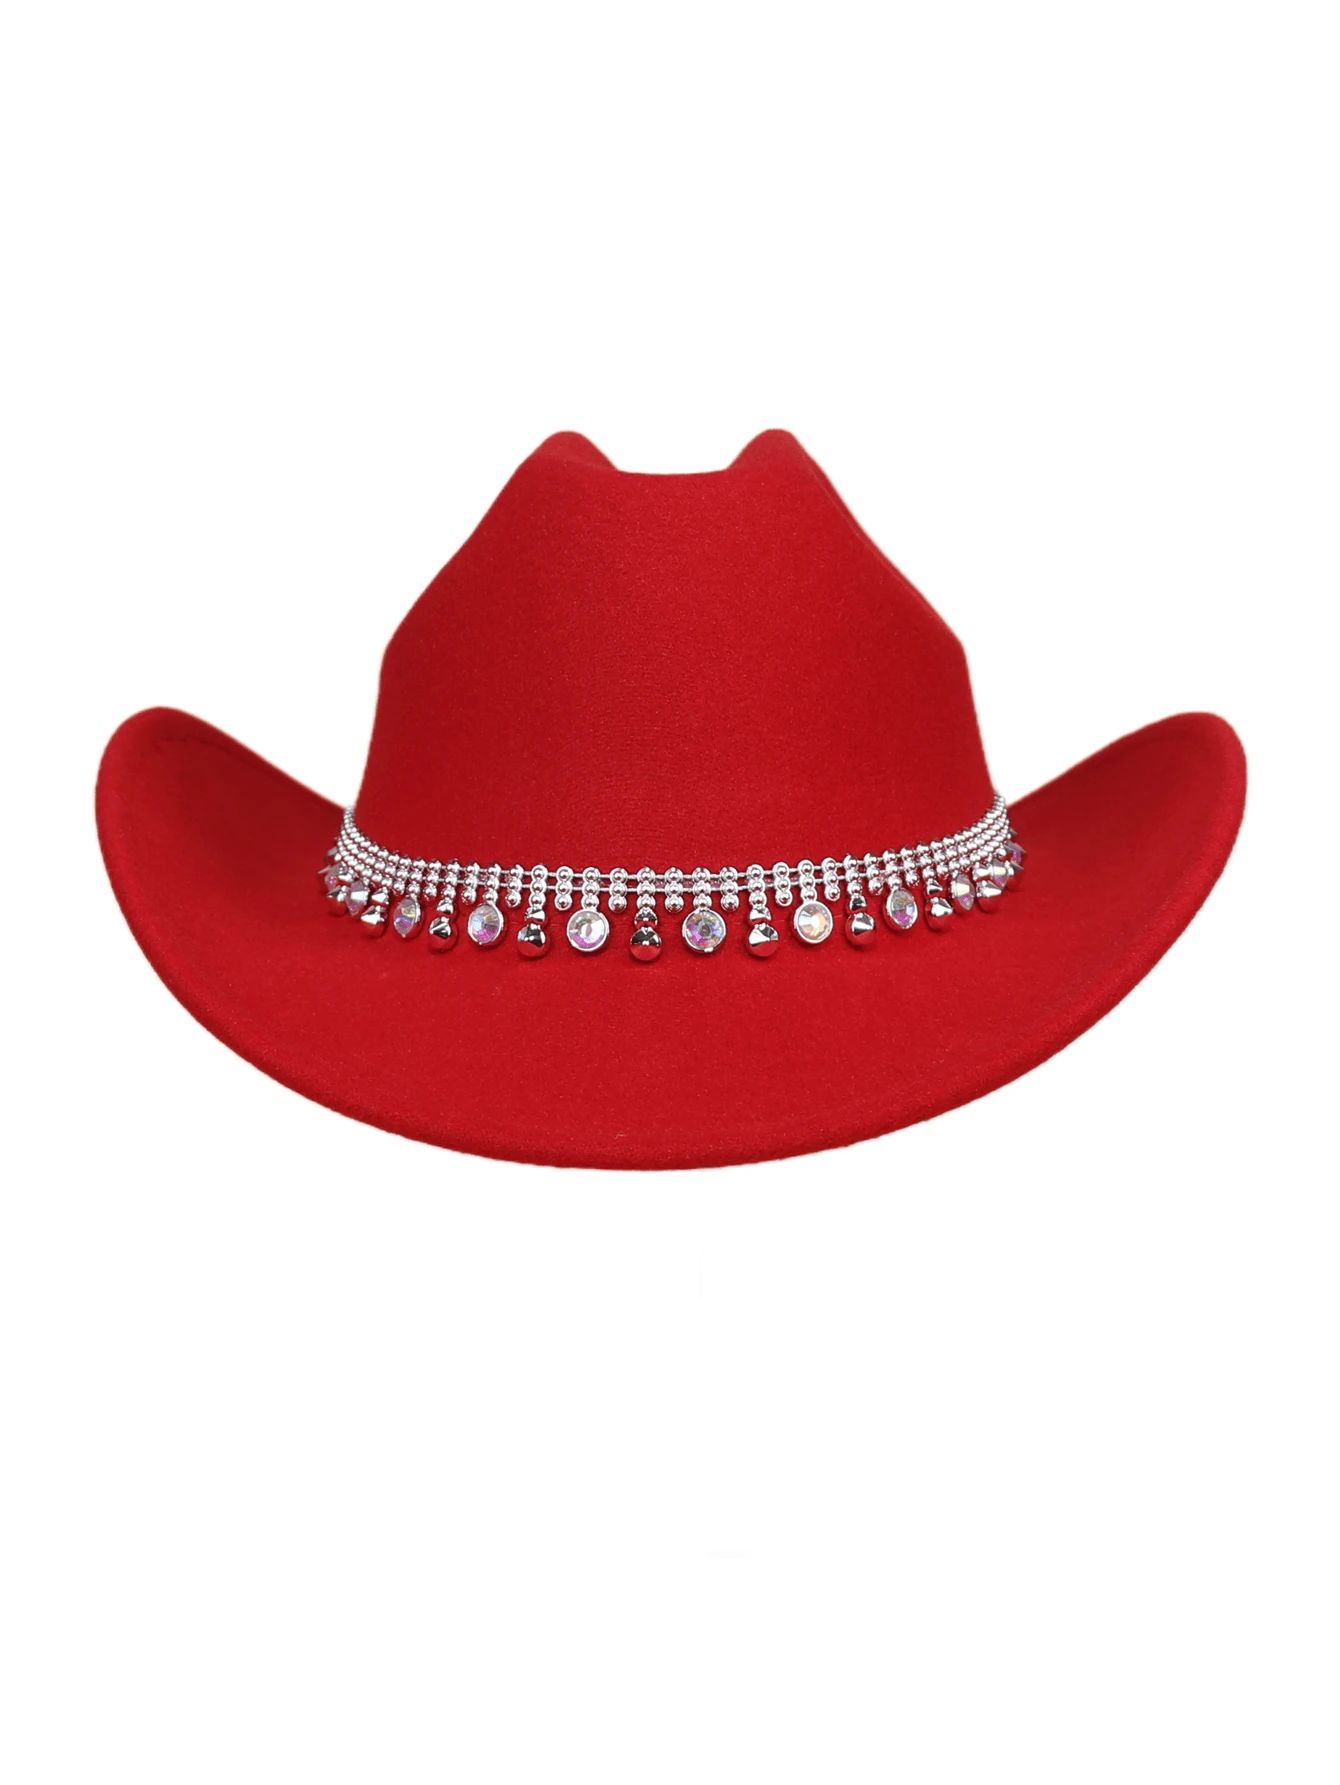 1pc Red Wool Felt Hat With Rhinestones. Suitable For Western Cowboy Hat, Dance Travelers, Jazz St... | SHEIN